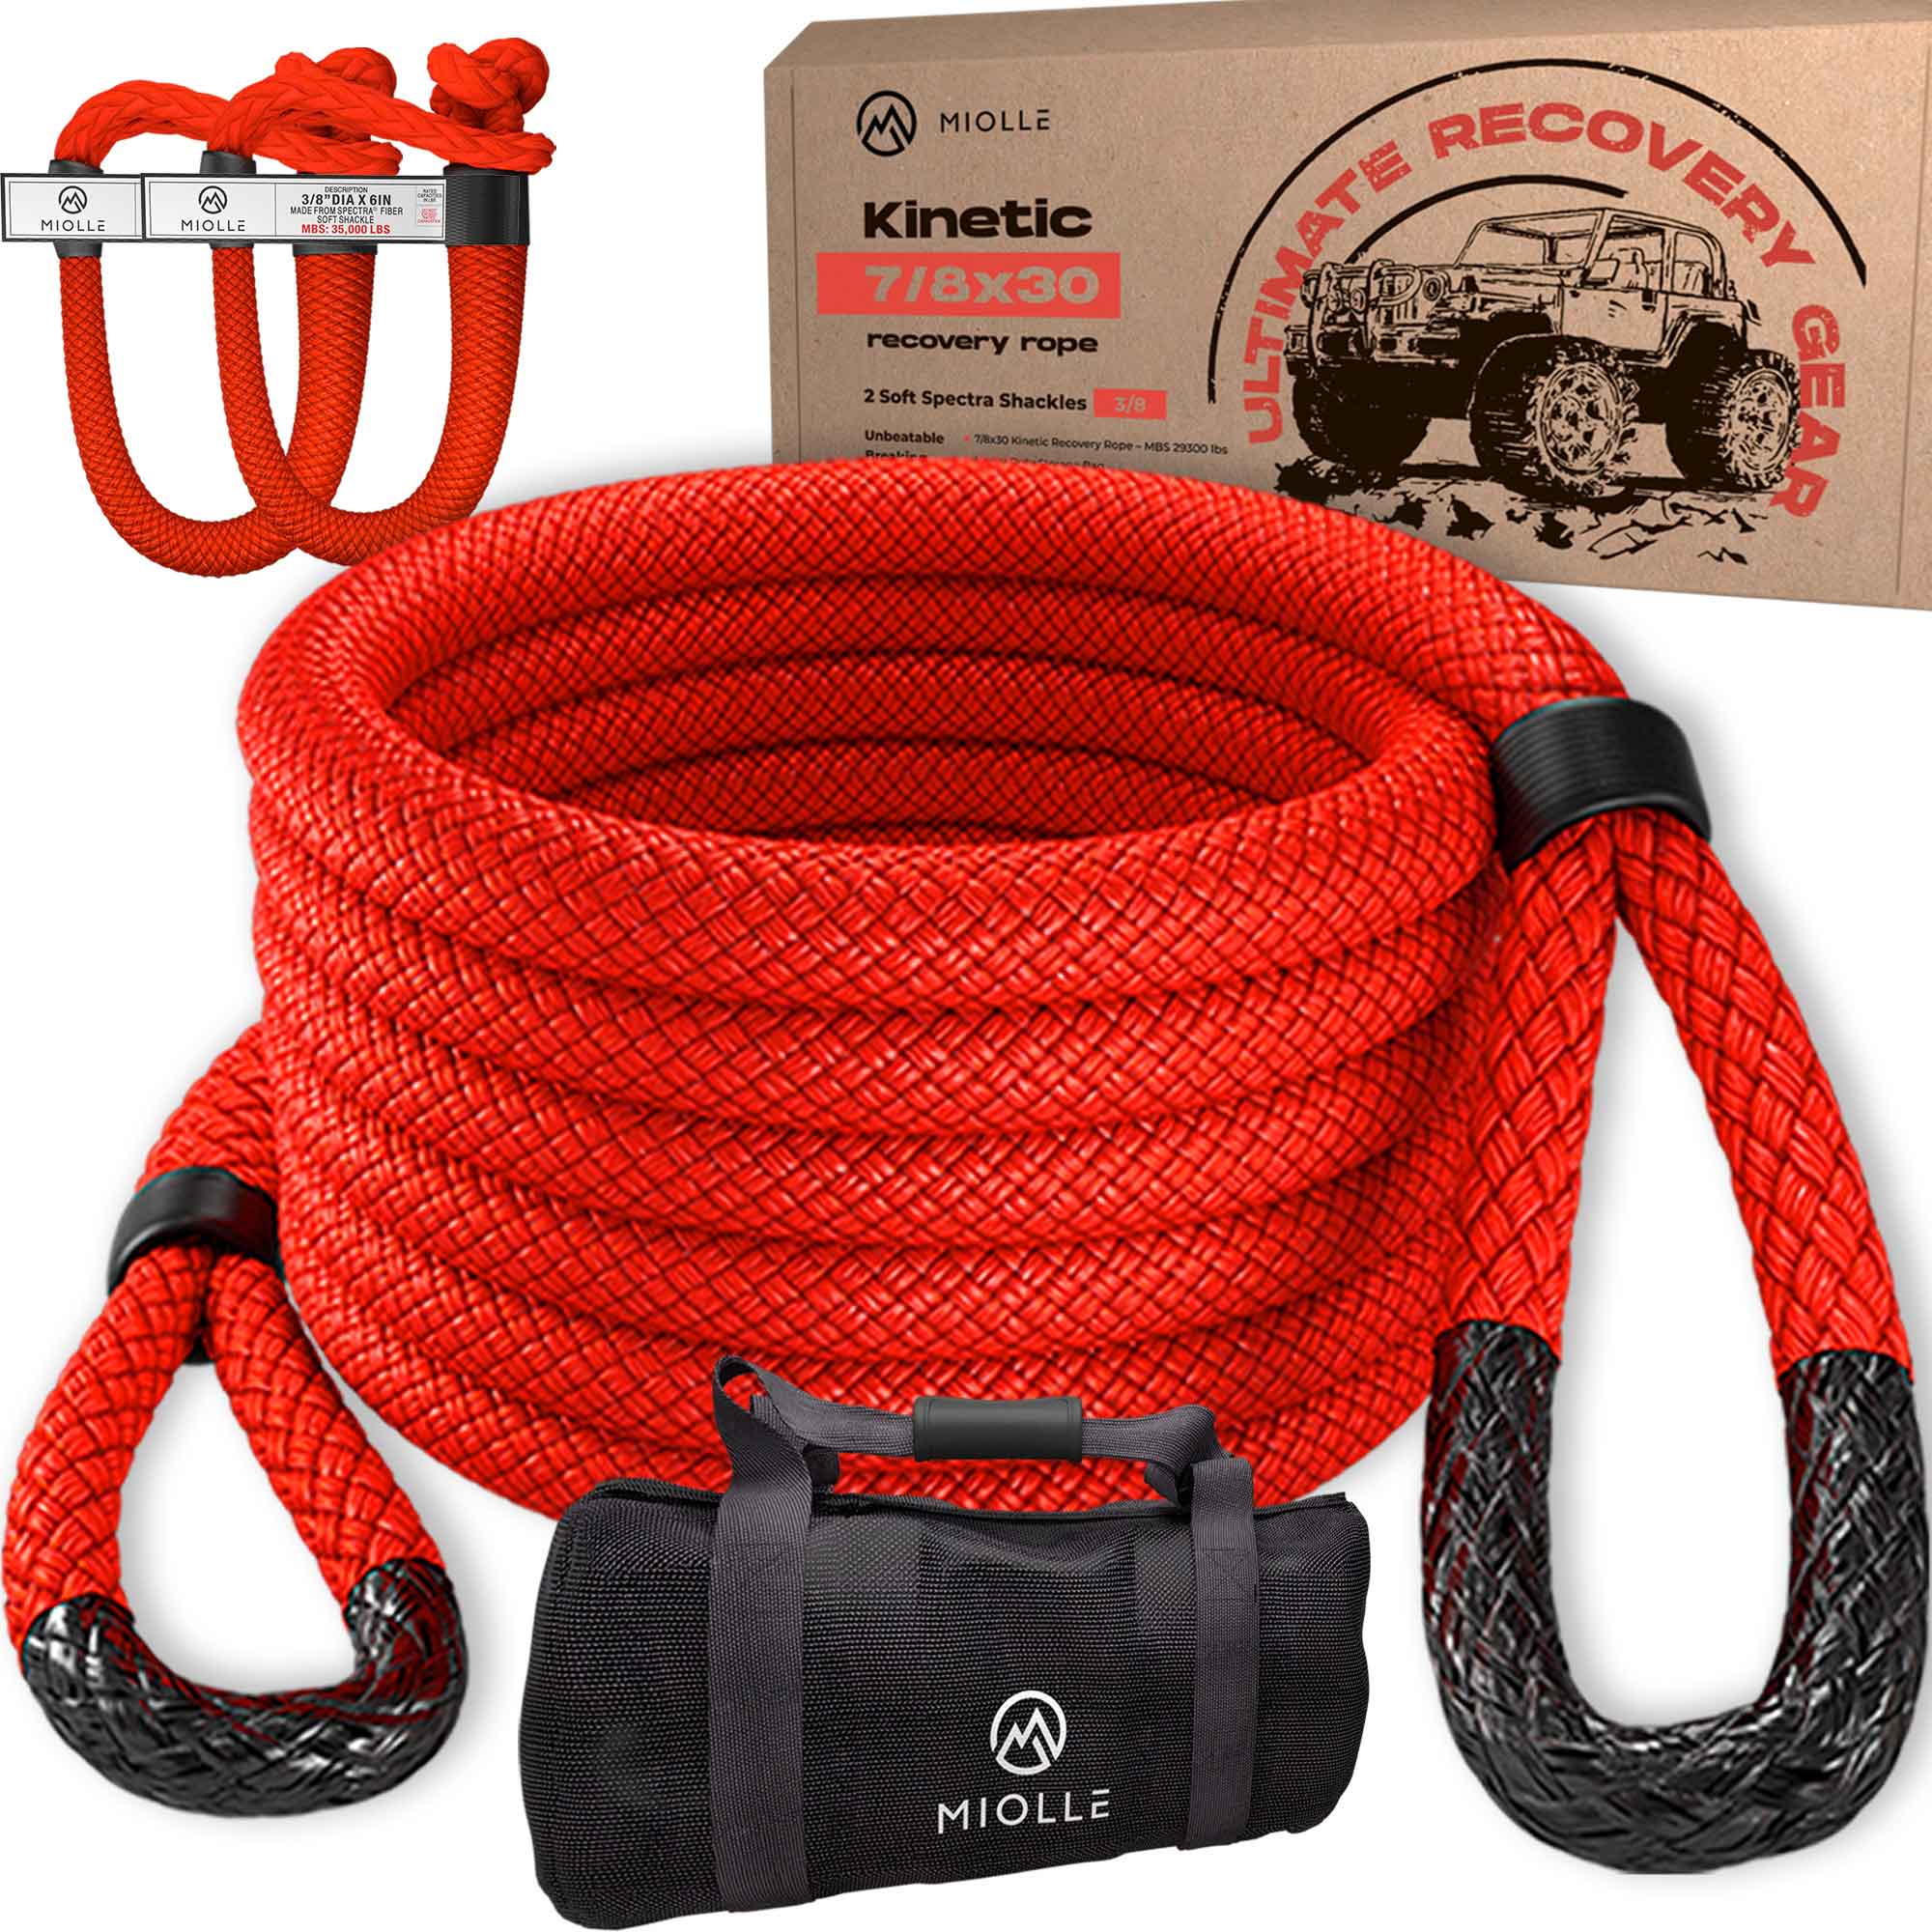 Kinetic Recovery Rope - Miolle 7/8